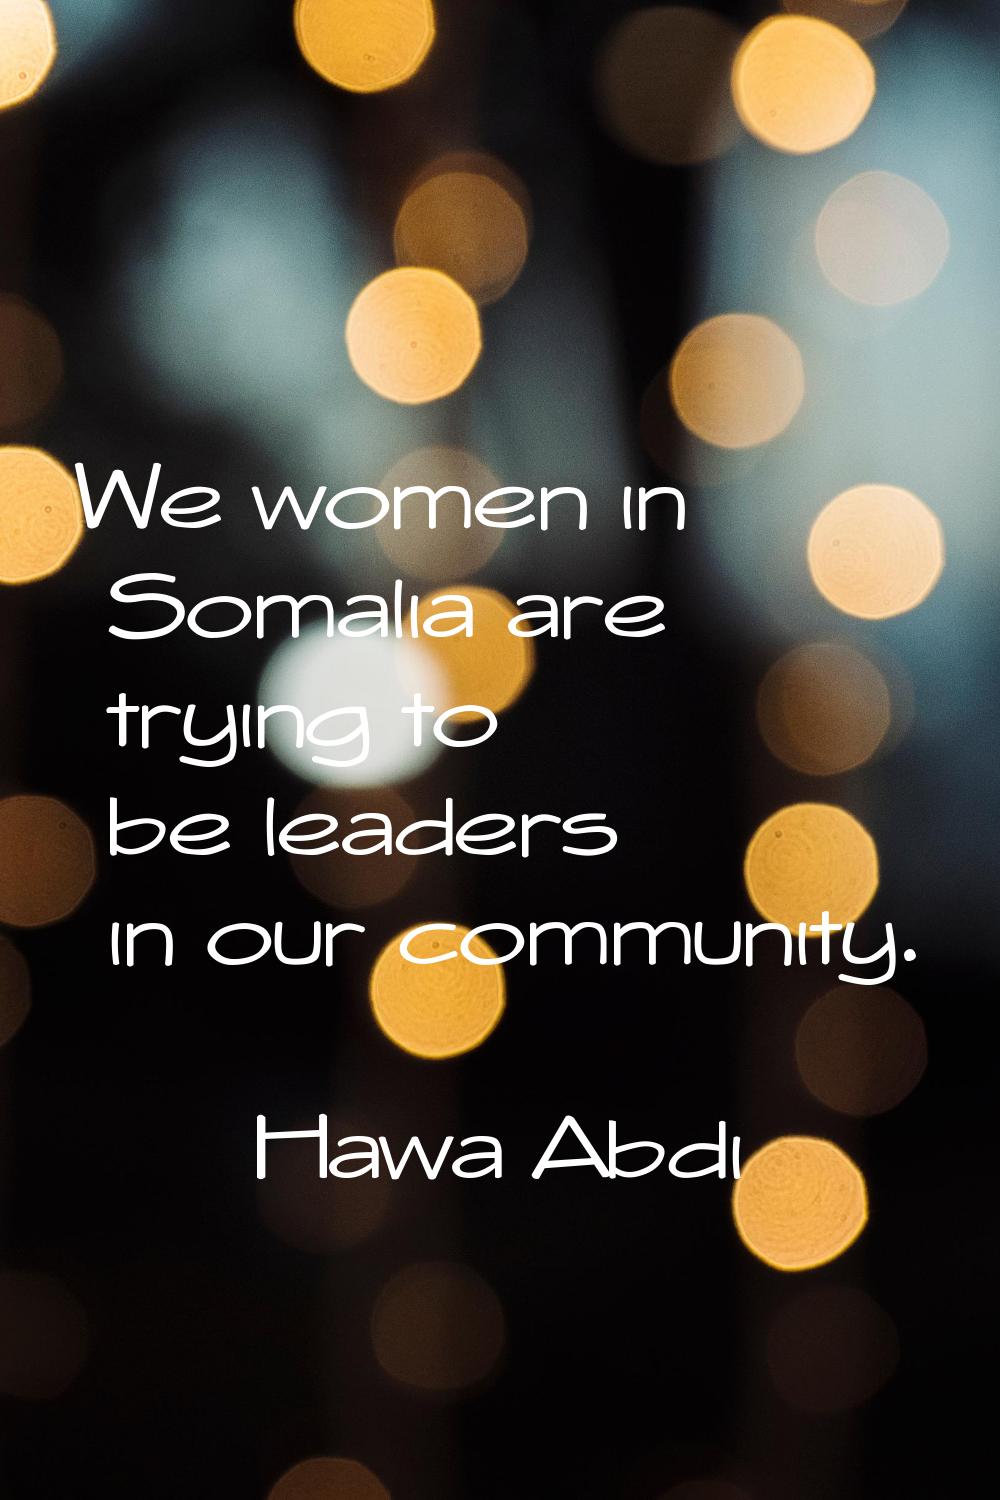 We women in Somalia are trying to be leaders in our community.